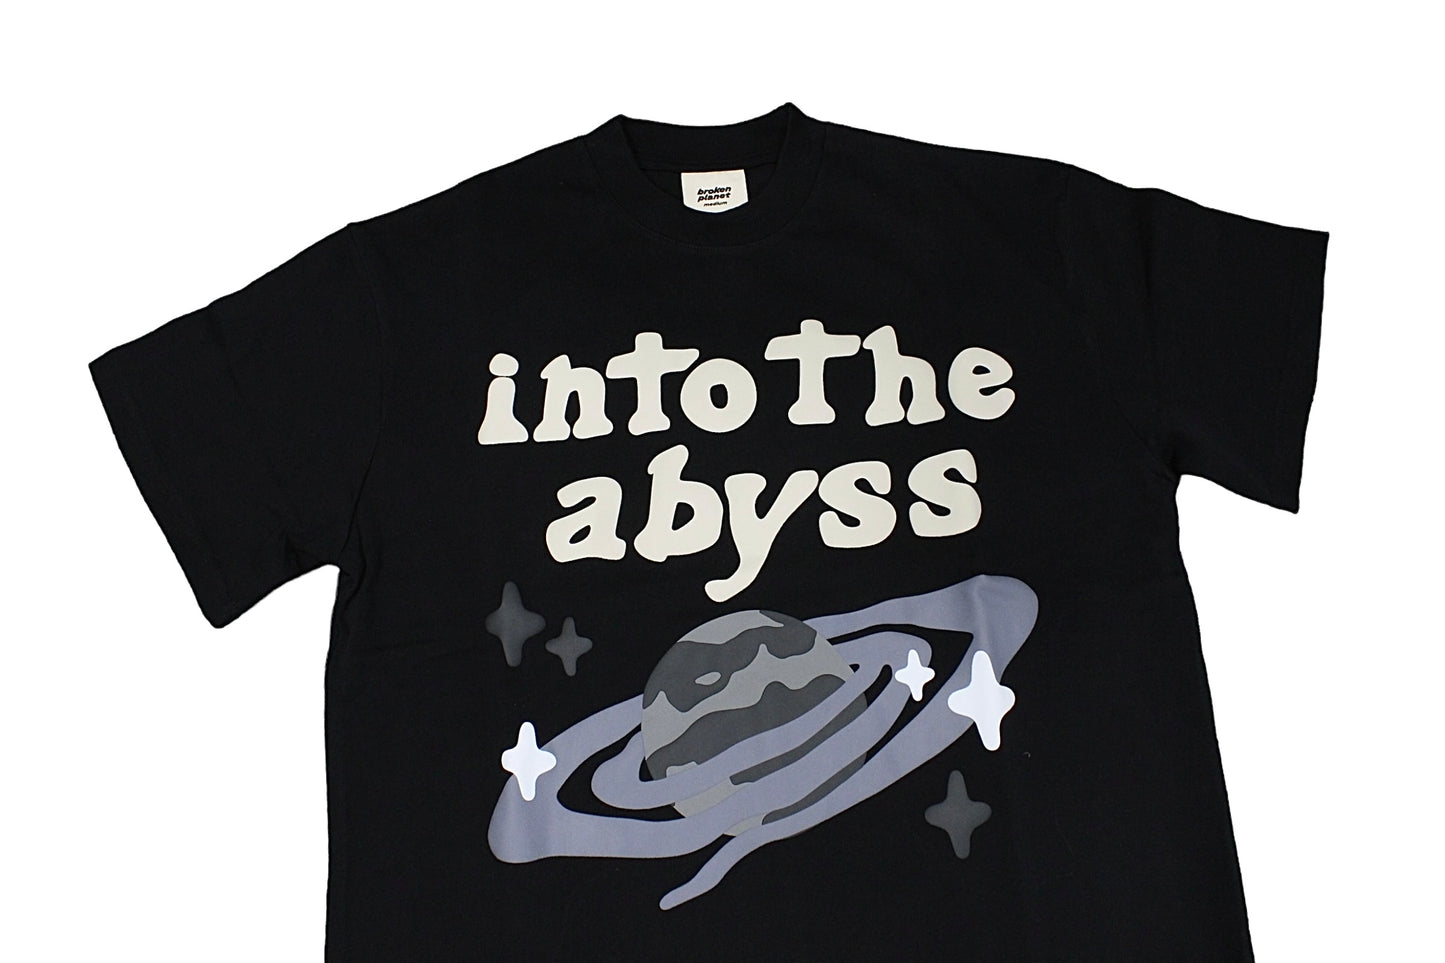 Broken Planet Into the Abyss Soot Black T-Shirt